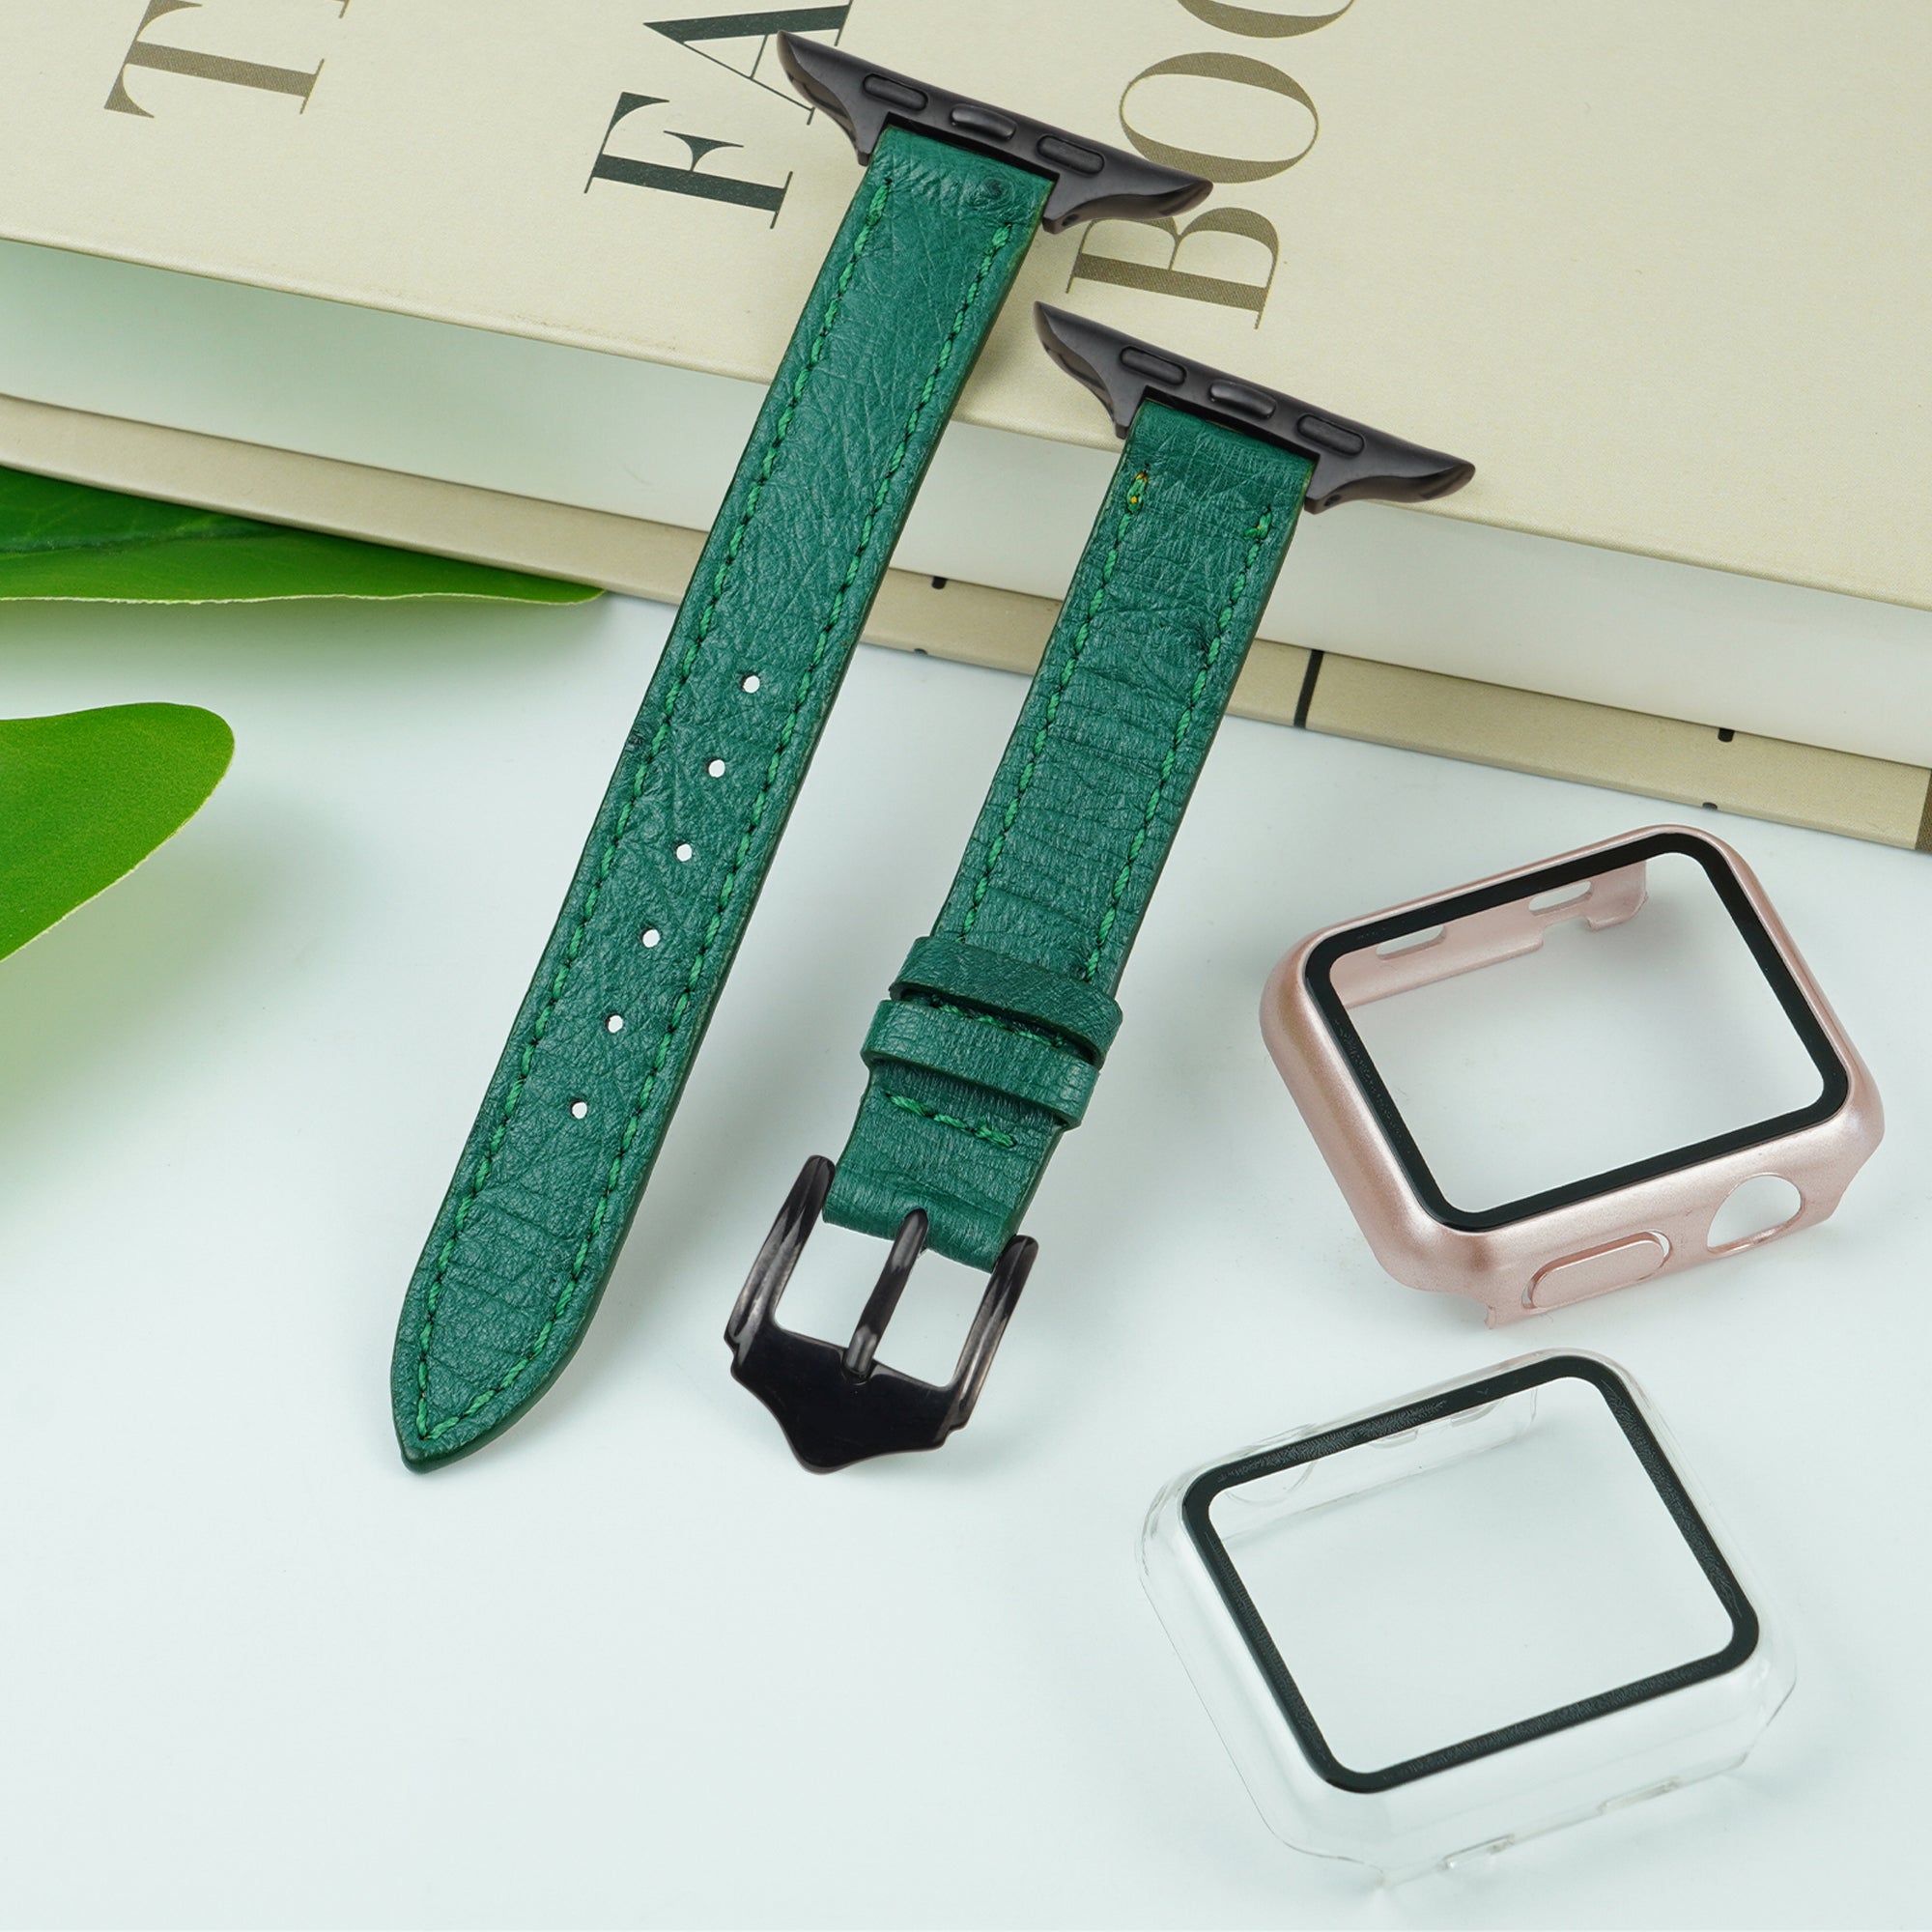 Green Flat Ostrich Leather Band Compatible Apple Watch Iwatch 42mm Screen Protector Case Black Adapter Replacement Strap For Smartwatch Series 1 2 3 Leather Handmade AW-188B-W-42MM